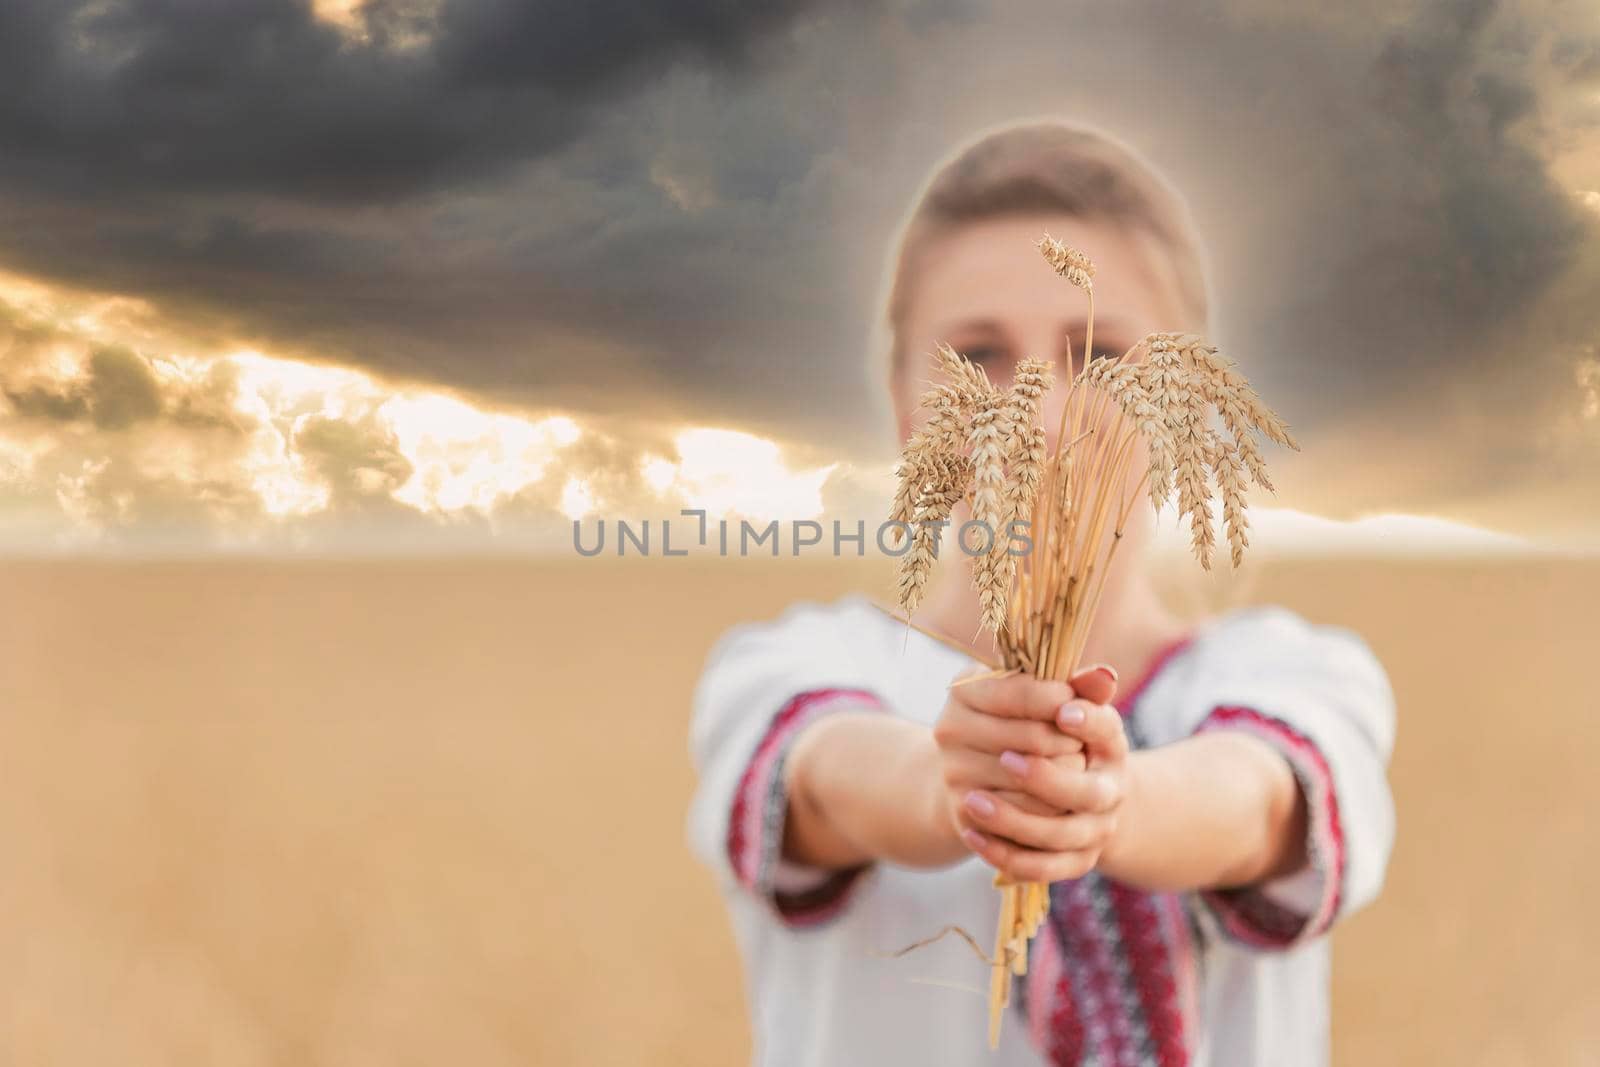 girl with wheat in her hands against the backdrop of the sunset sky by zokov